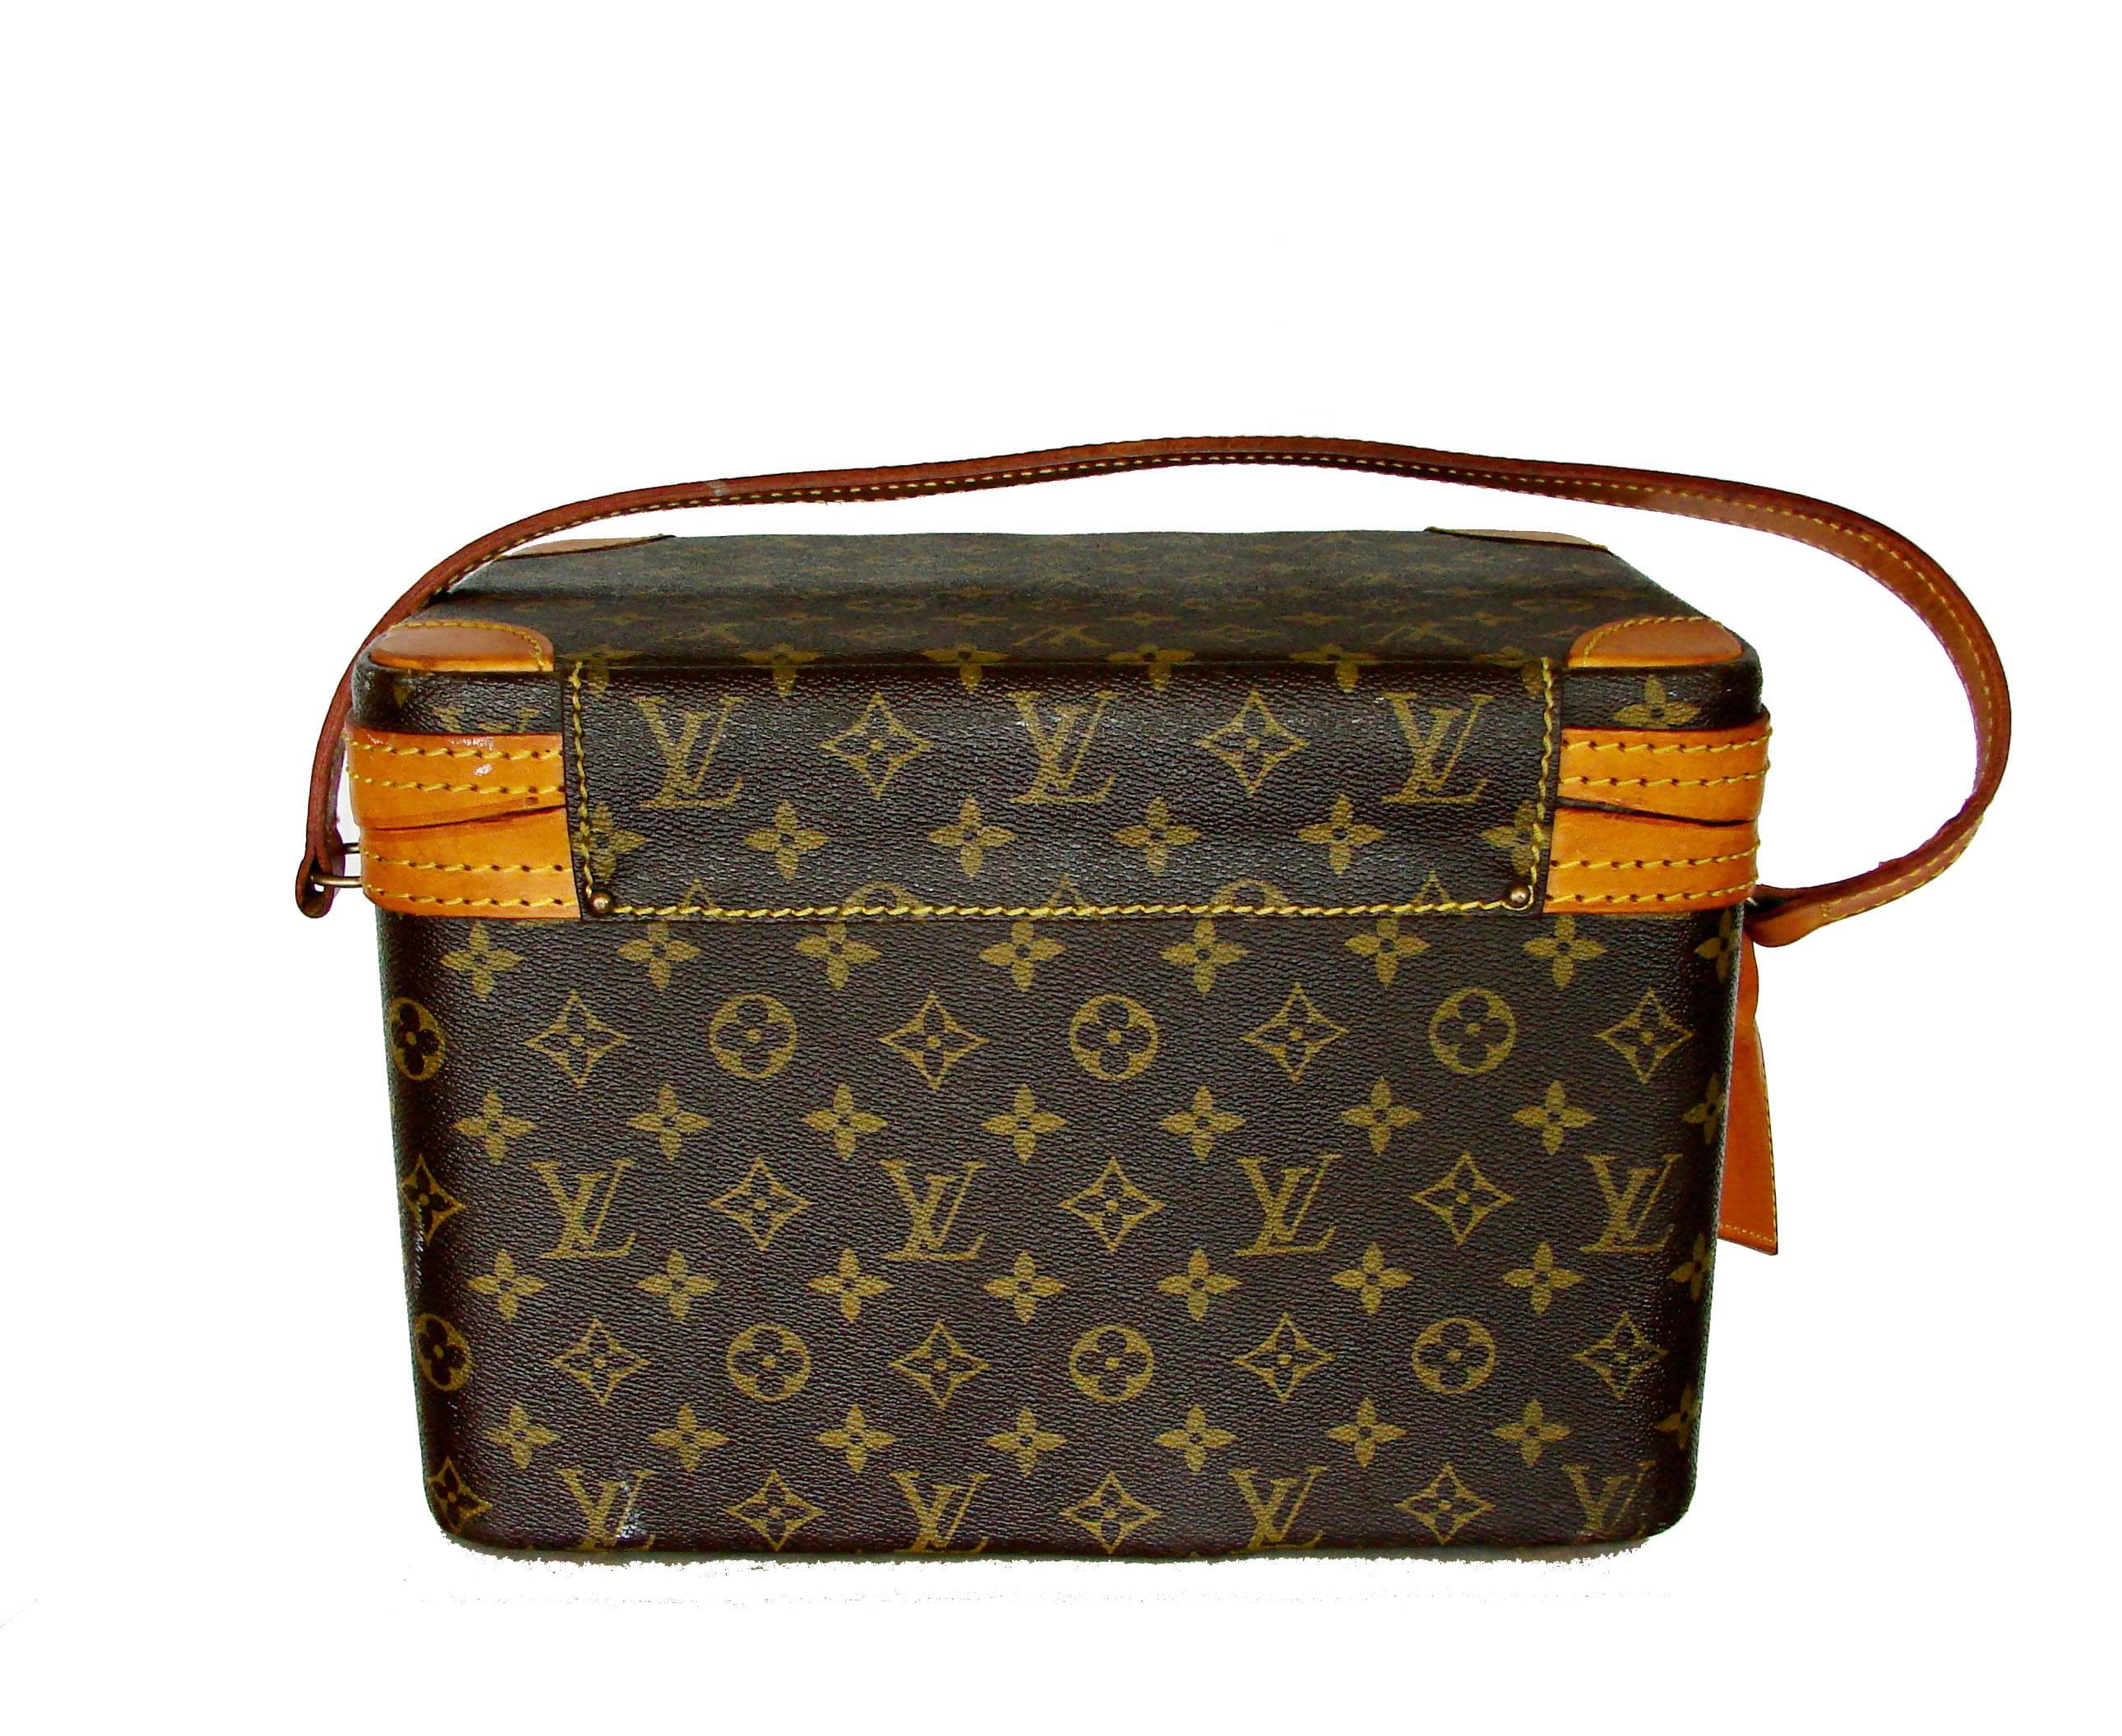 This hard to find Louis Vuitton train case or toiletries bag was made in the 1980s.  Made from their signature monogram canvas, it's trimmed in vachetta leather and the interior is lined in cloth.  The interior features a leather strap that holds up